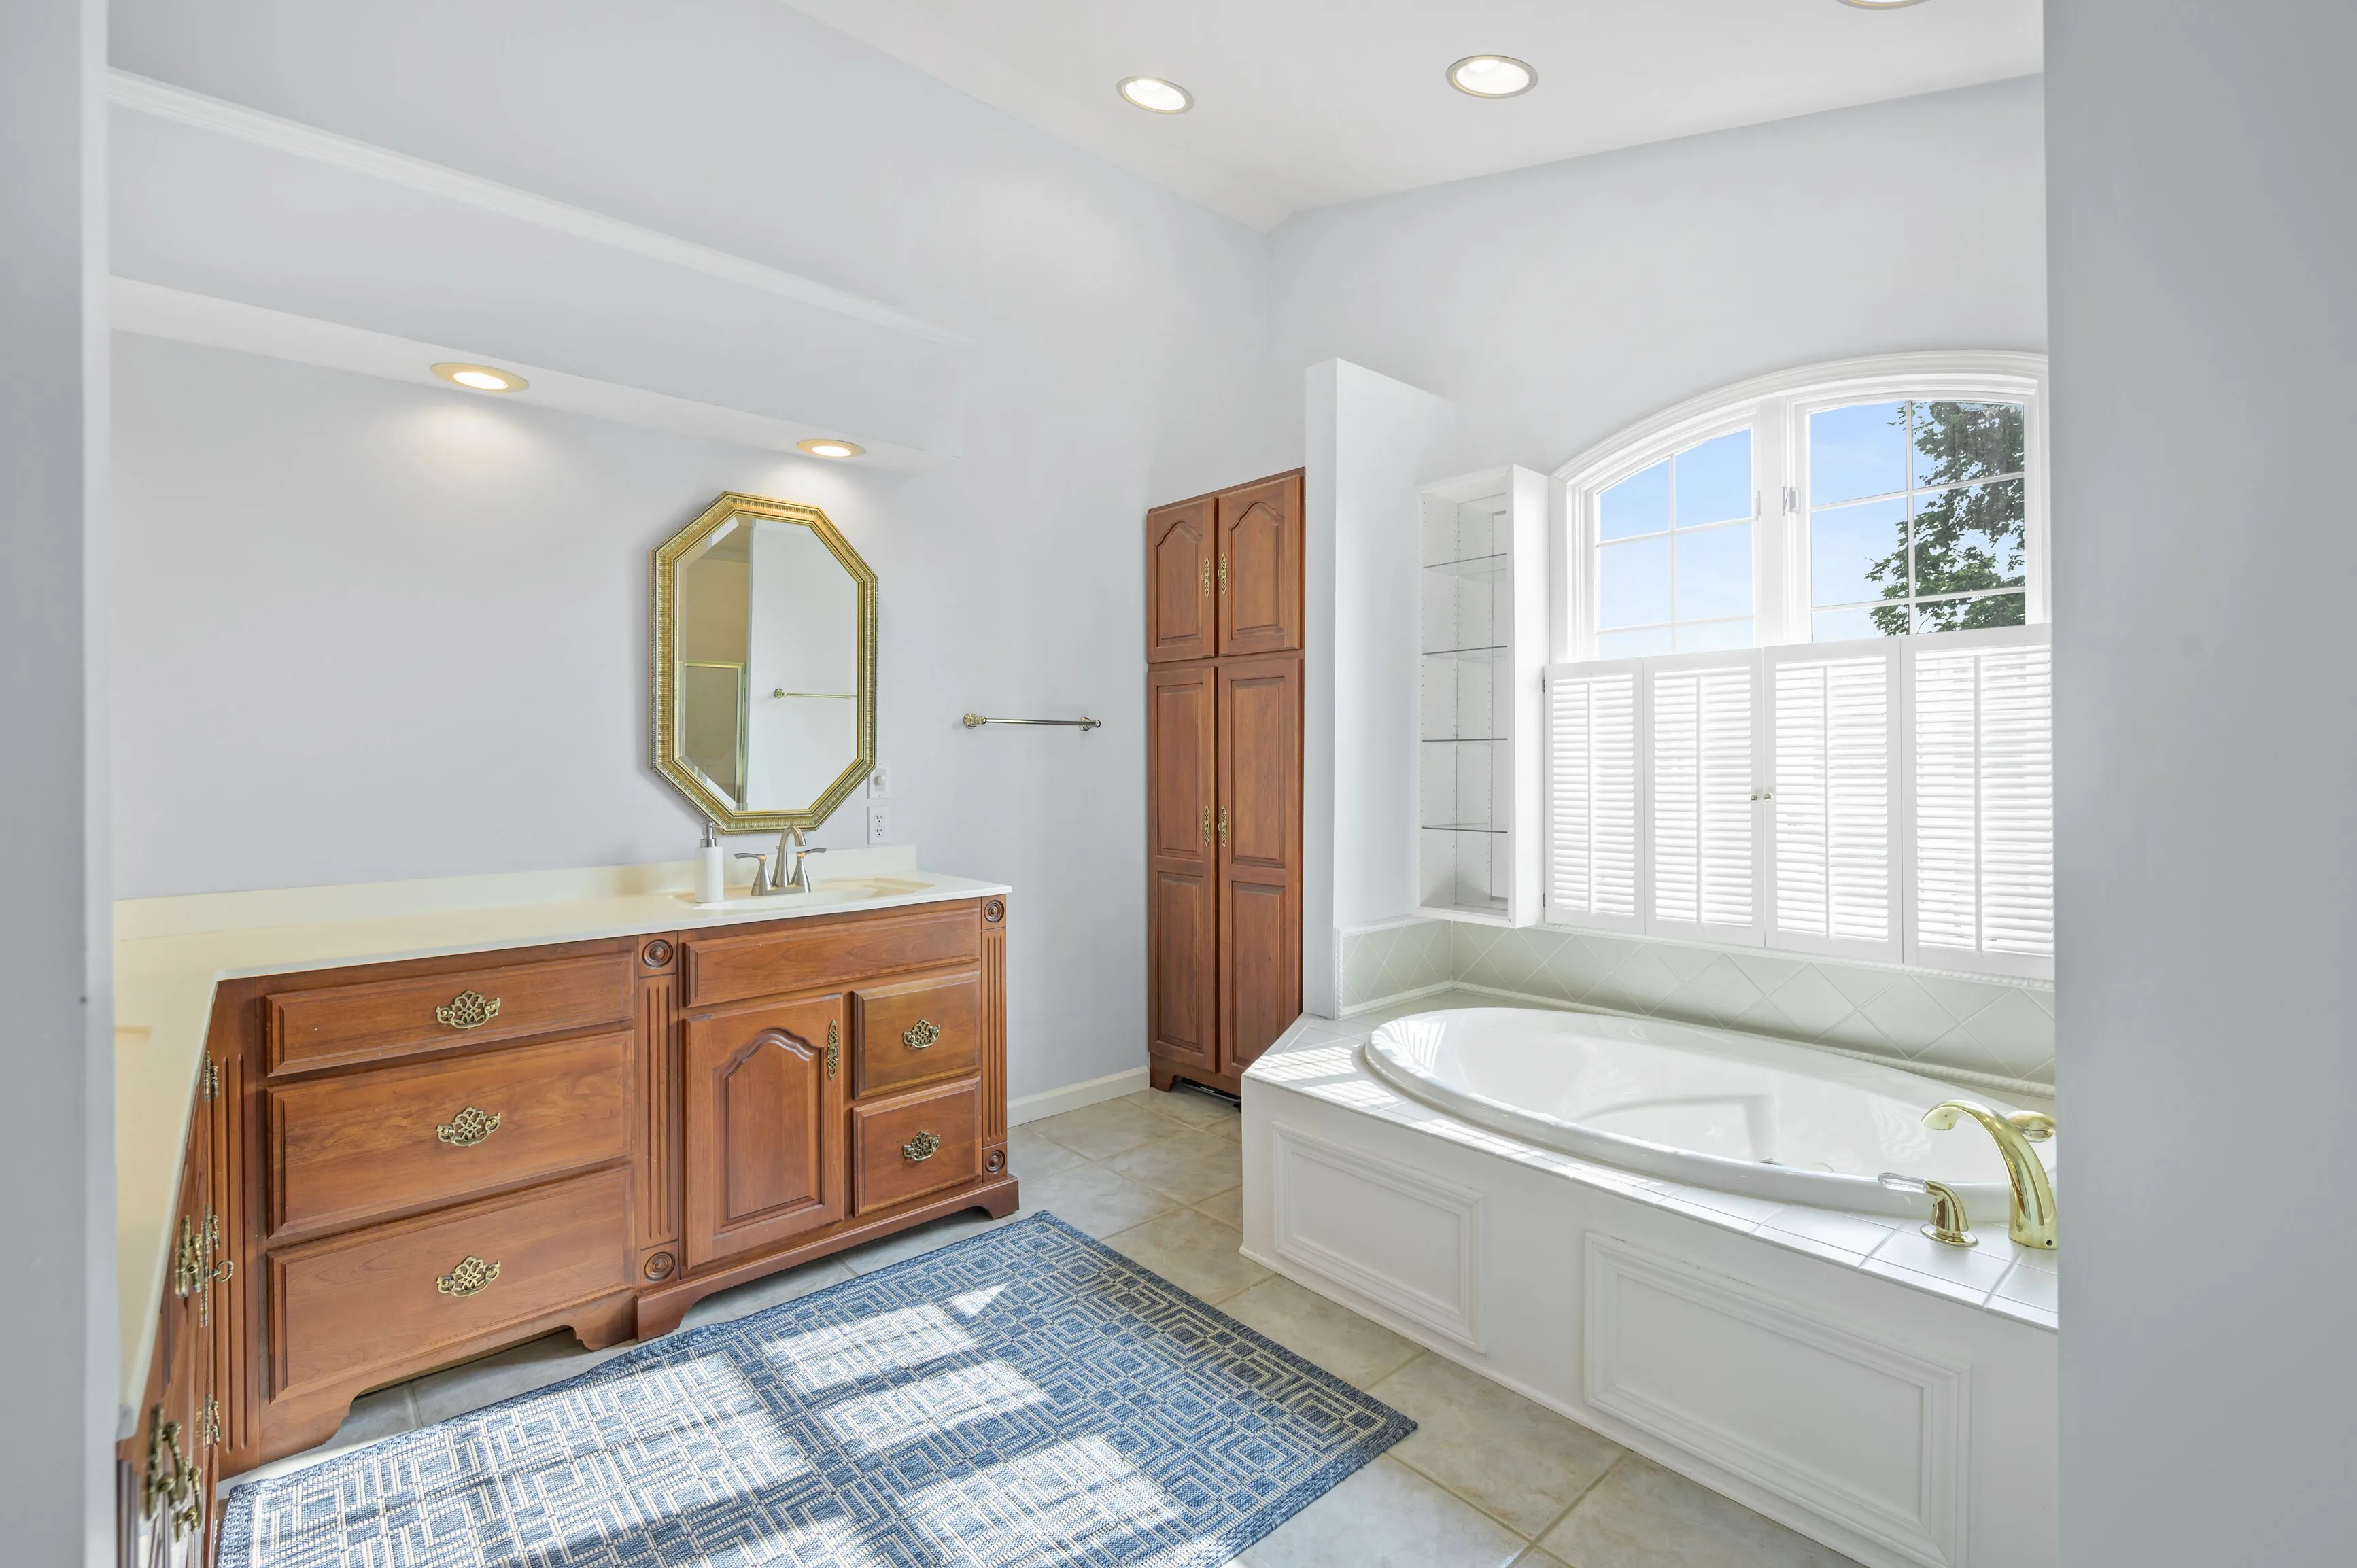 Bright modern bathroom with a large bathtub, wooden vanity cabinet, octagonal mirror, and a window with natural light.